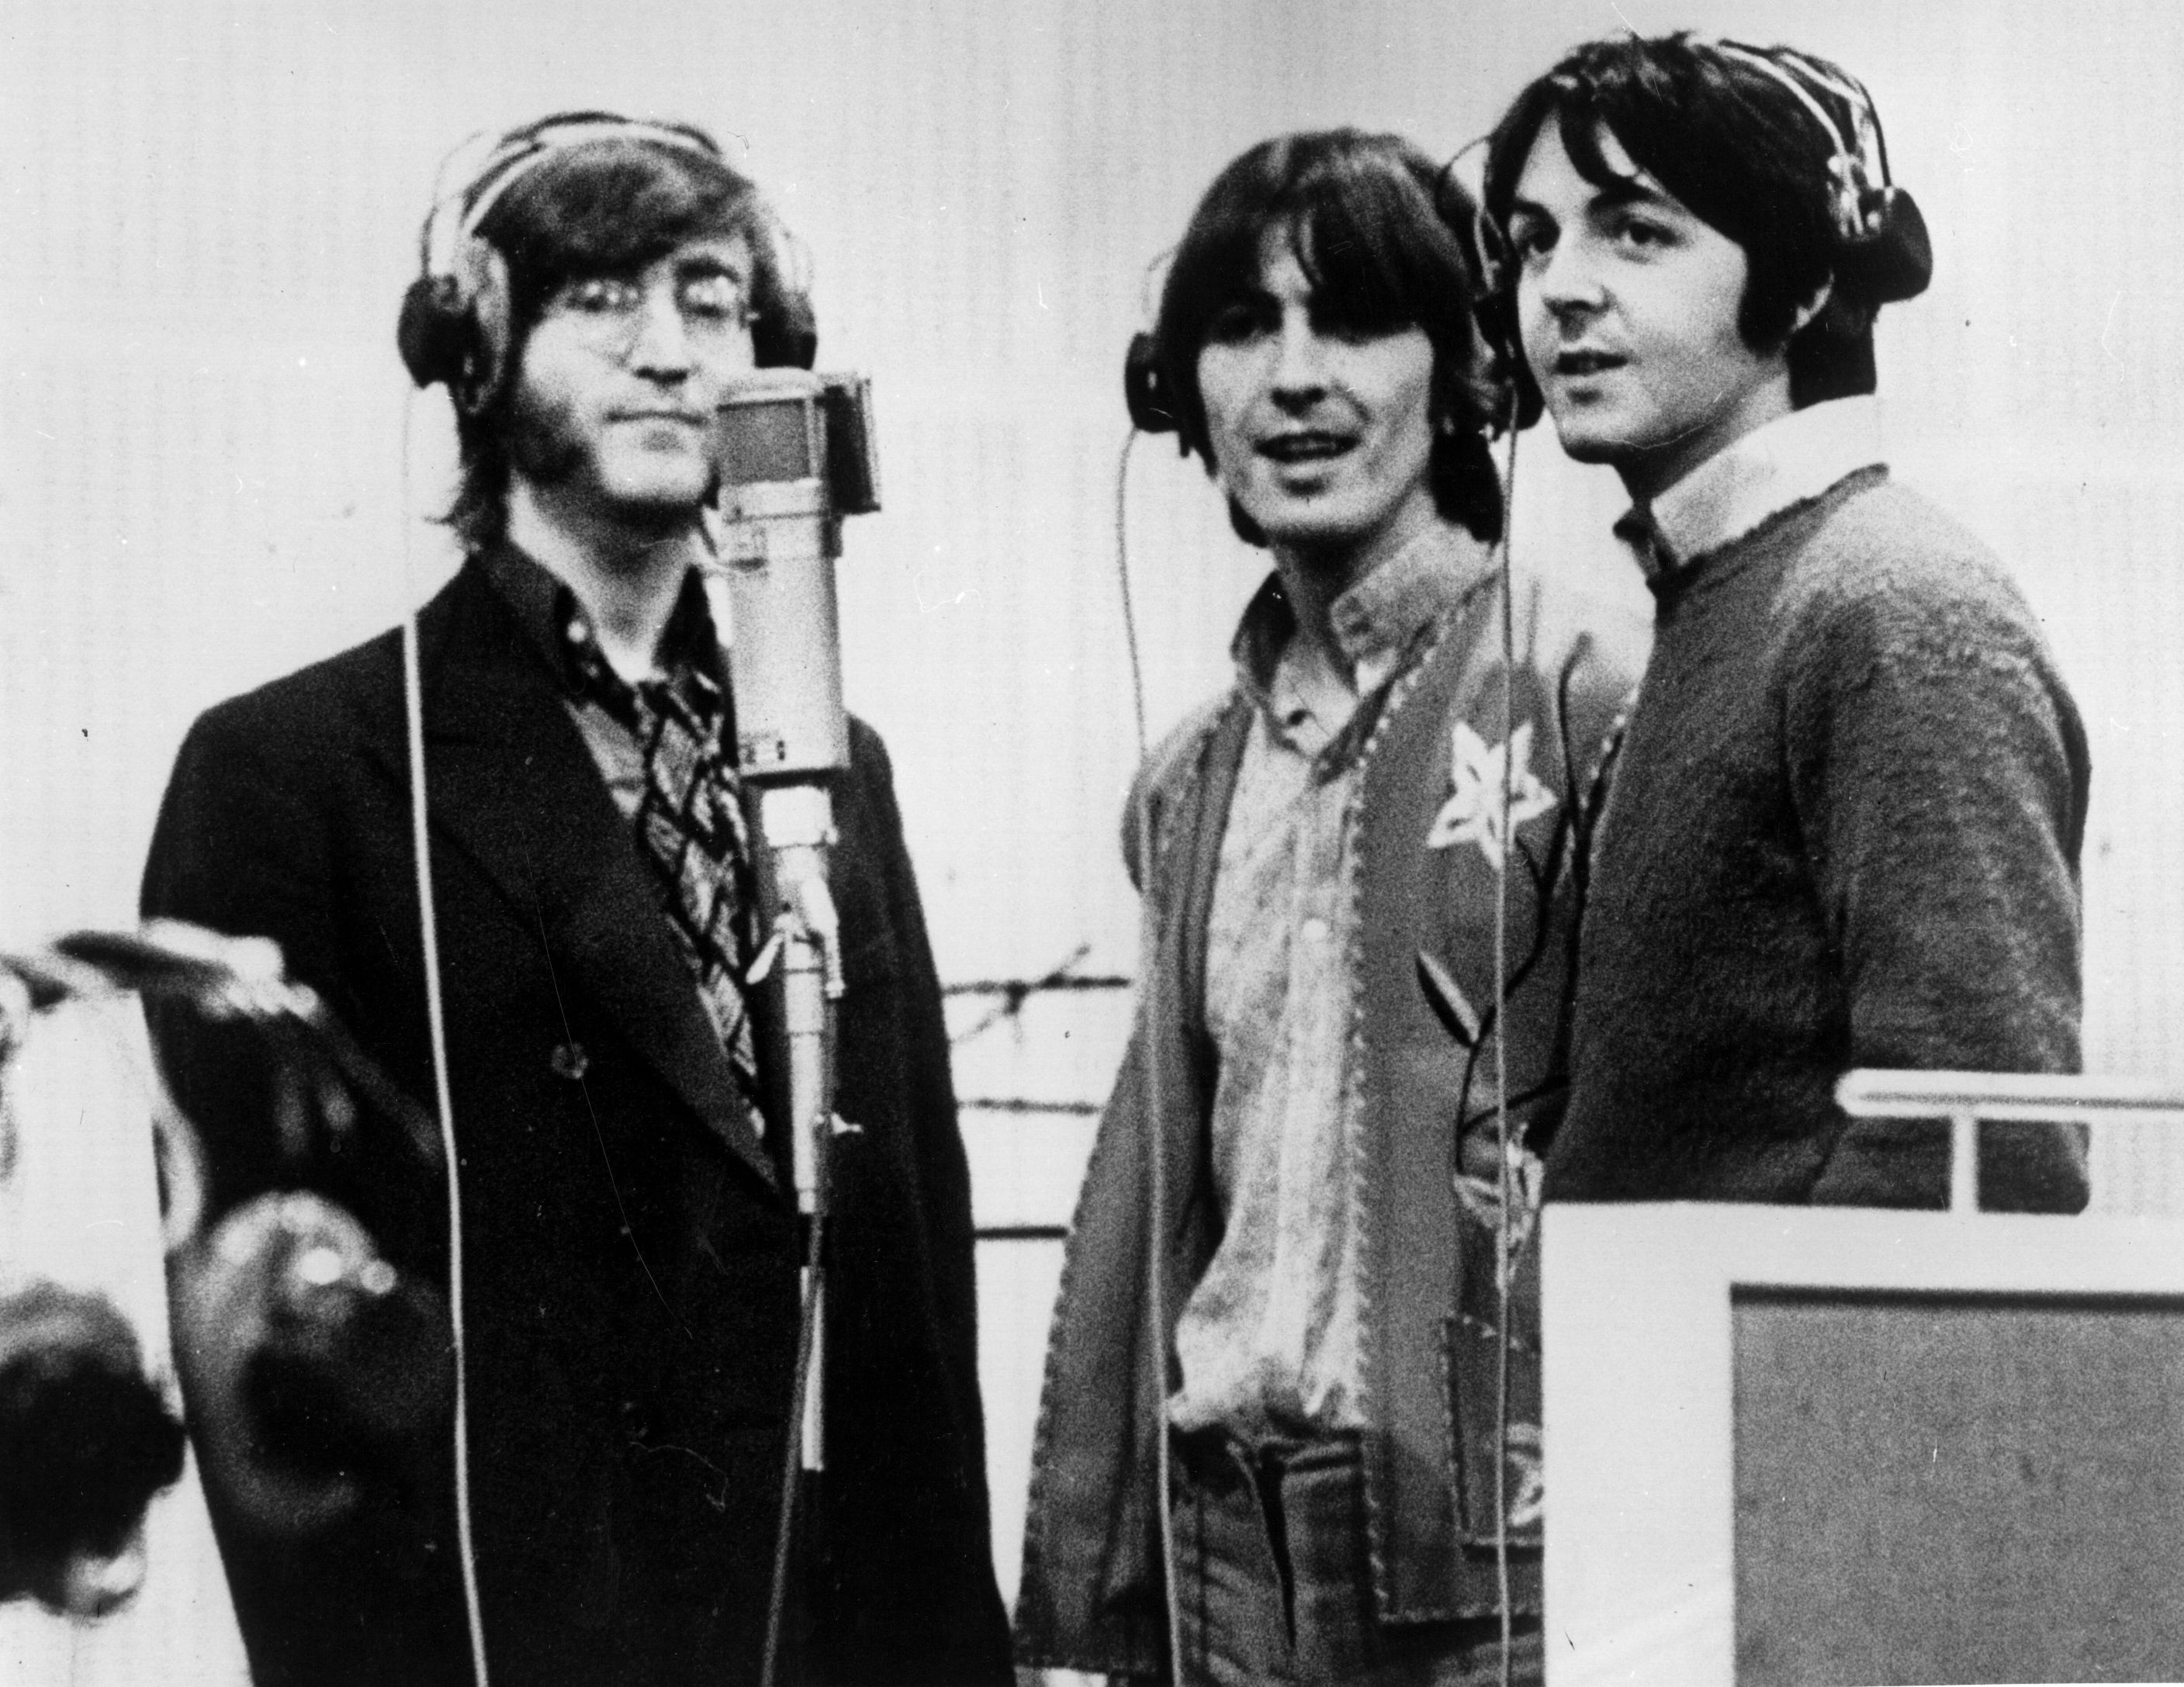 The Beatles' John Lennon, George Harrison, and Paul McCartney near a microphone recording lines for 'Yellow Submarine'